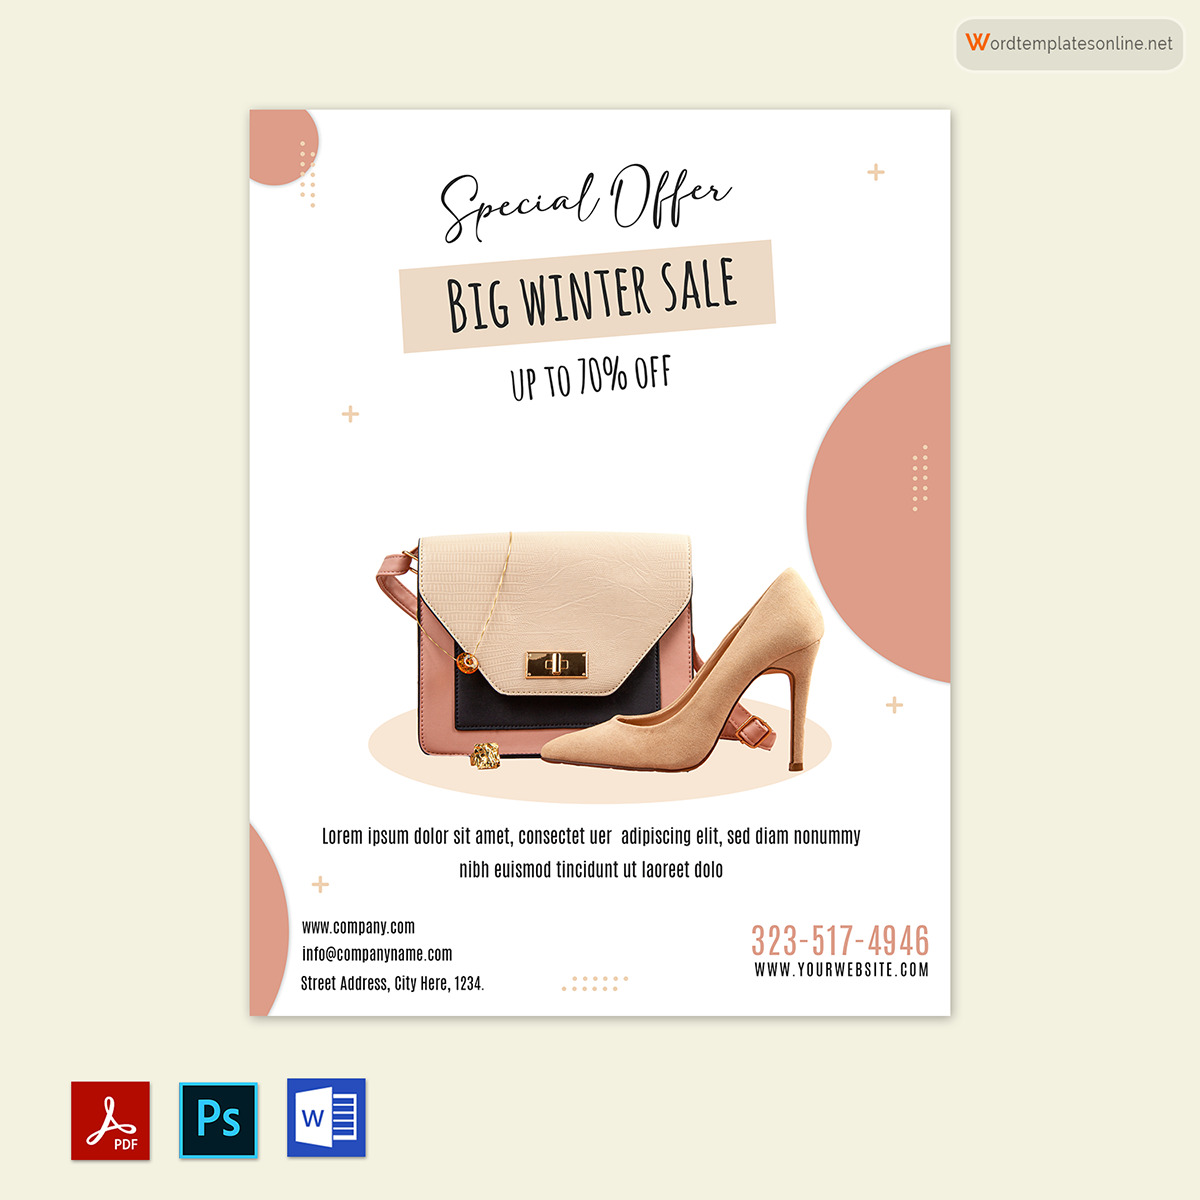  sales flyer template free 01